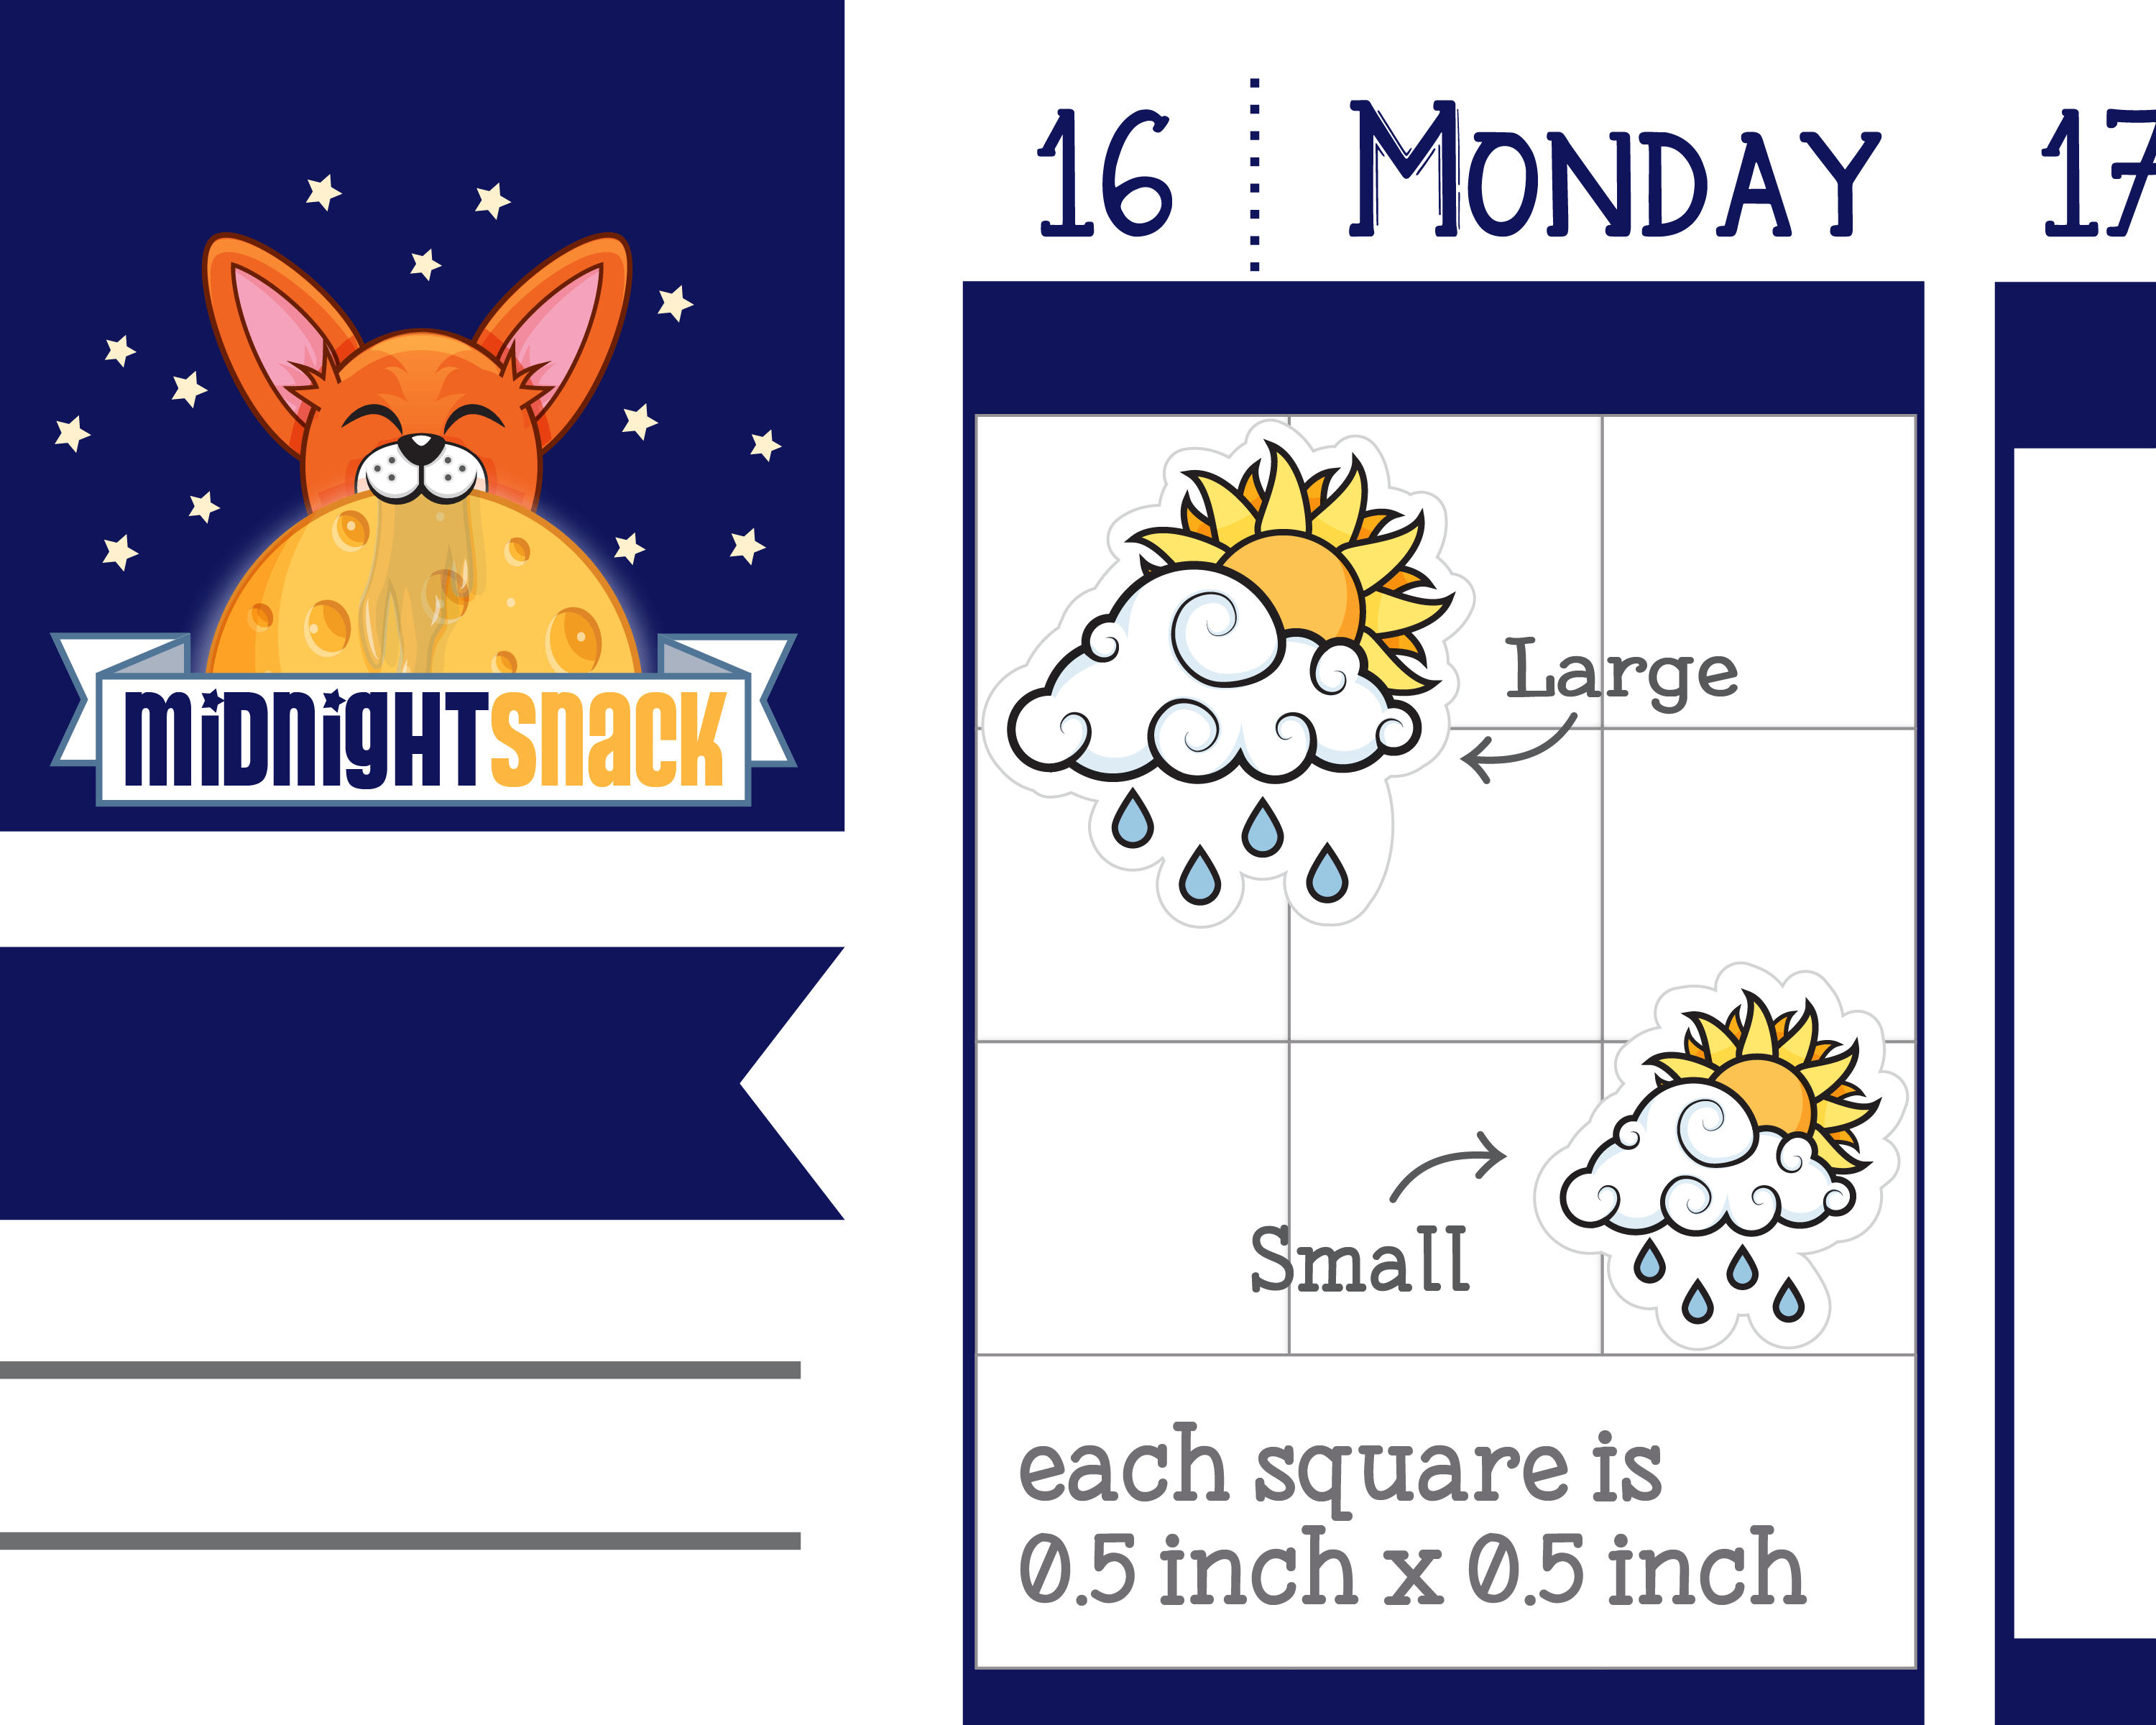 Scattered Showers Icon: Weather Planner Stickers Midnight Snack Planner